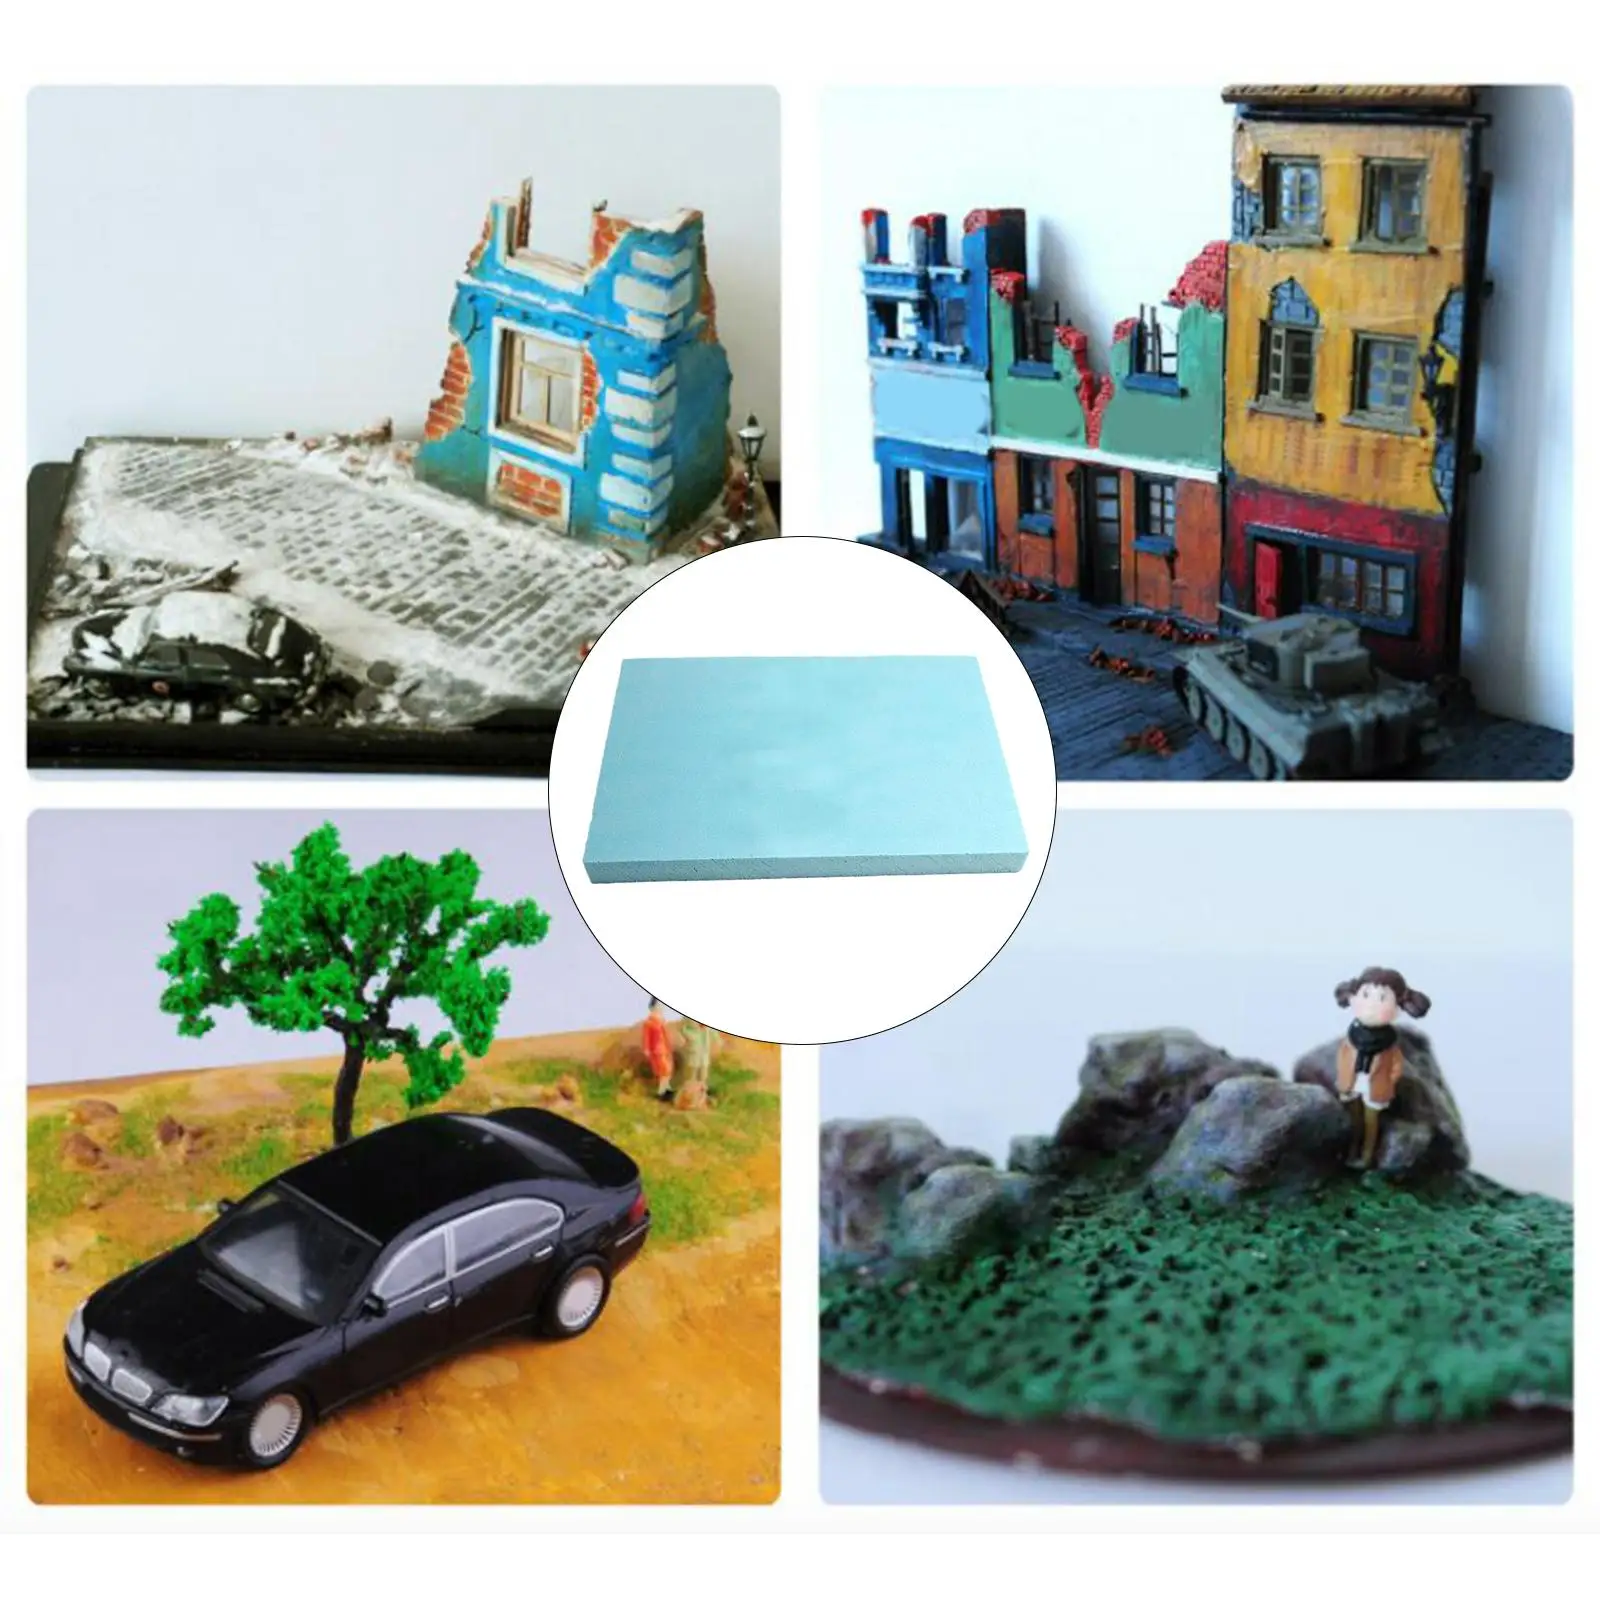 High Density Polystyrene Boards Sculpting Sheets Foam Board Diorama Base for Sculpture Hobby Arts Crafts Modeling Accessories